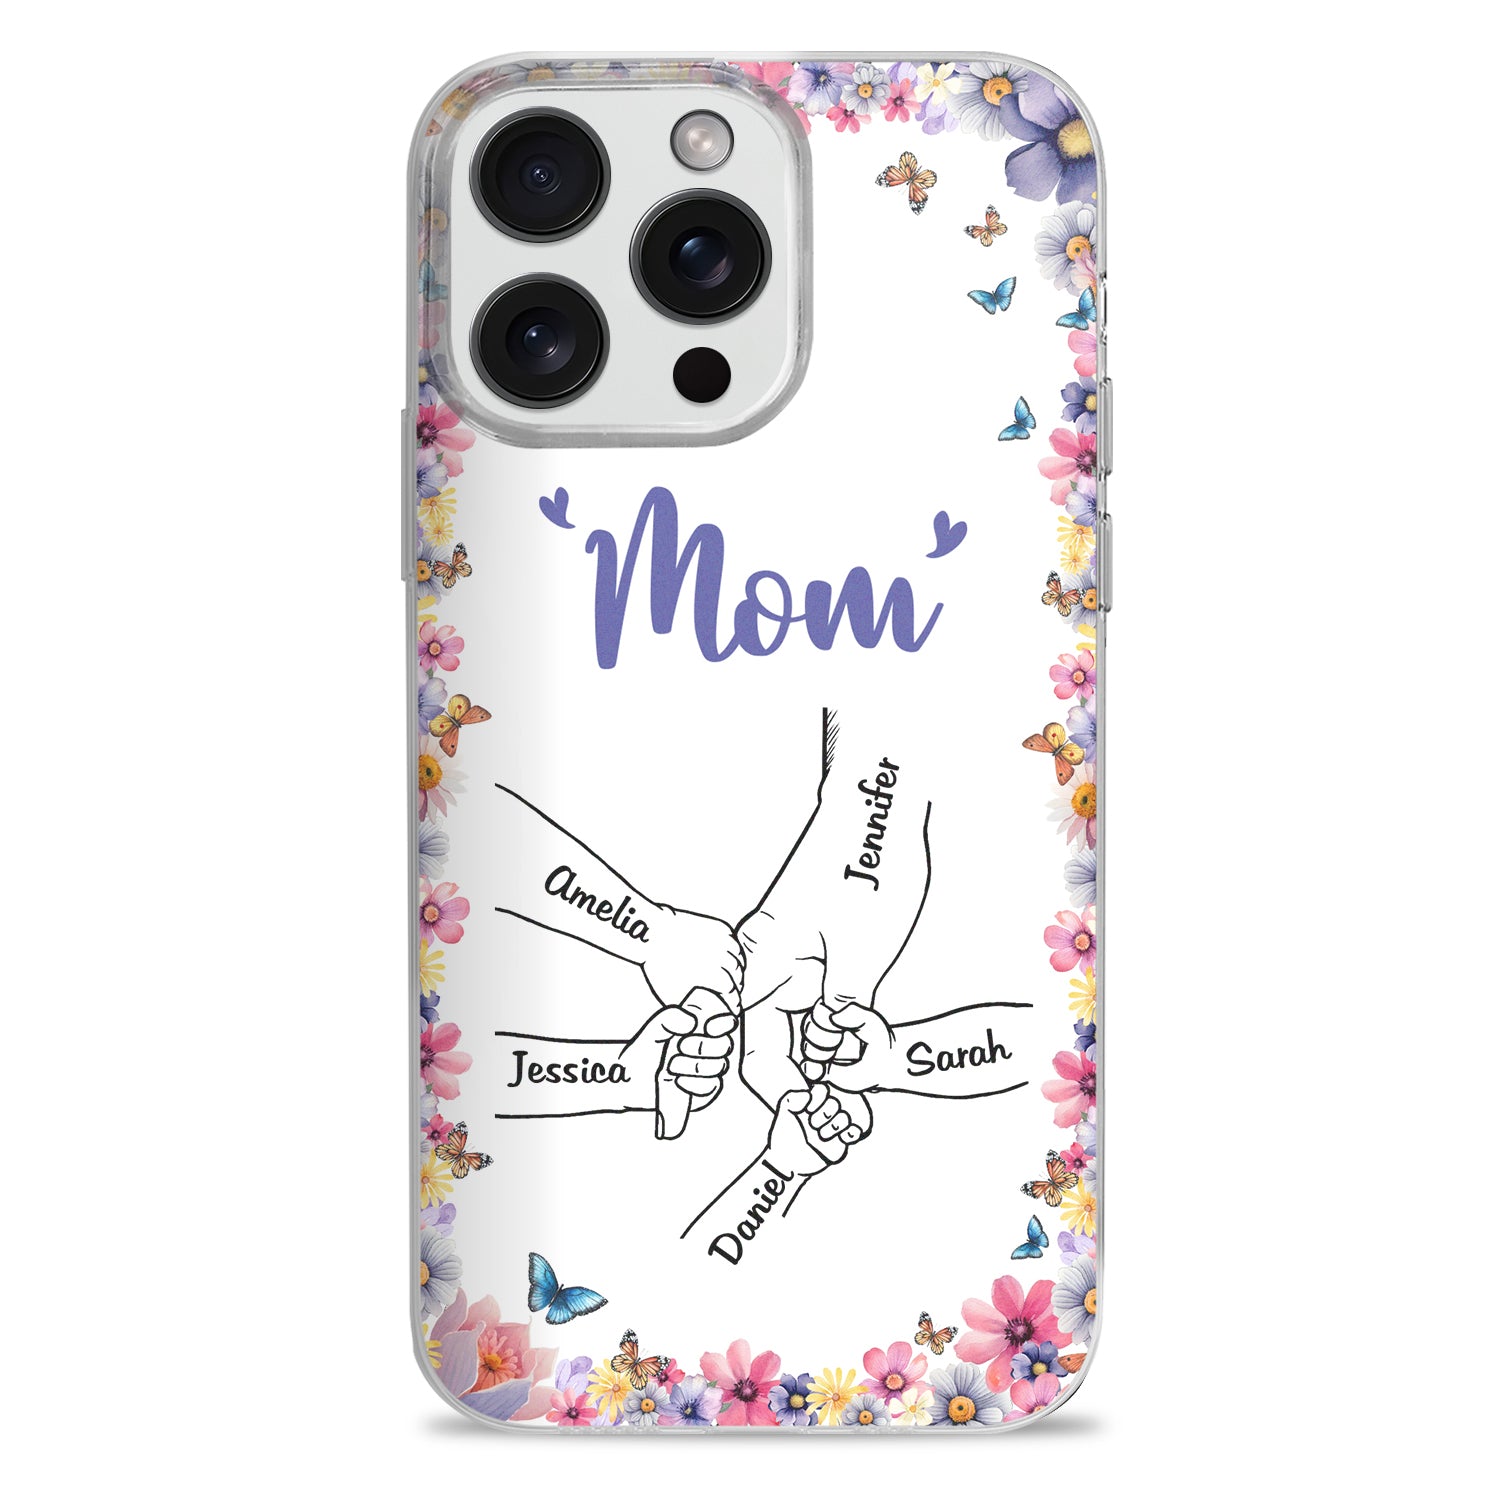 Mom Grandma Kids Hand In Hand - Gift For Mother, Grandmother - Personalized Clear Phone Case